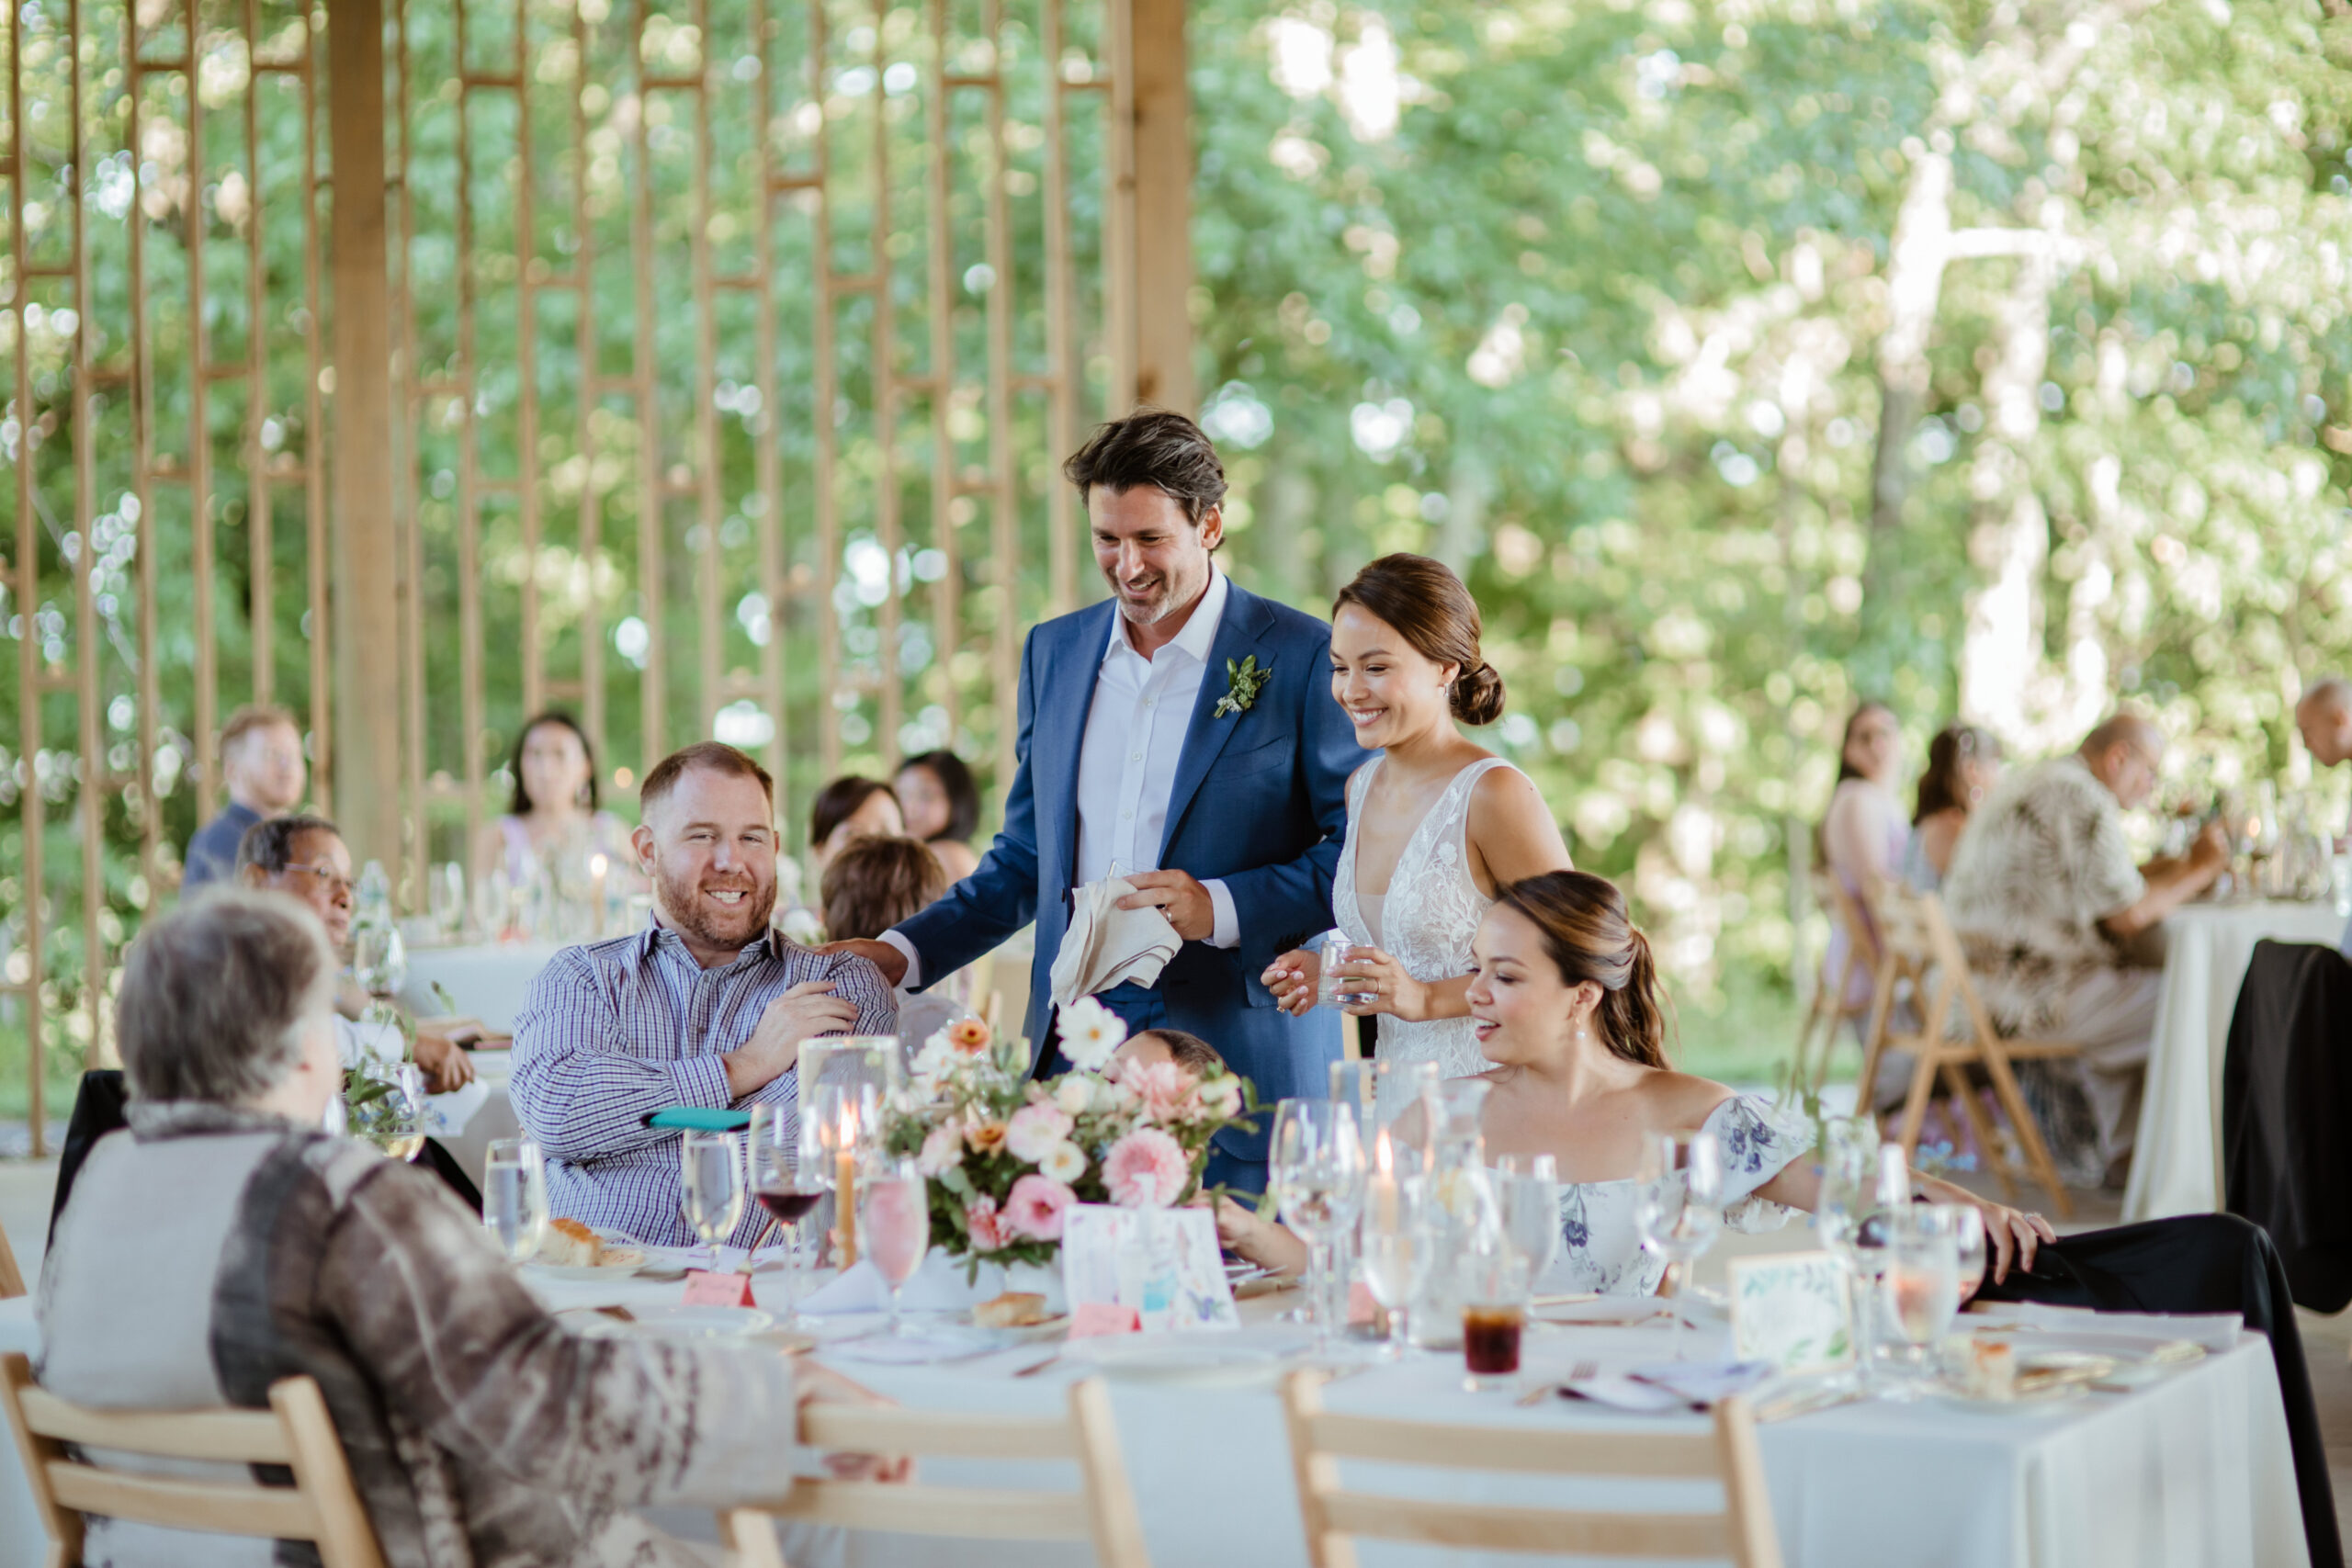 Stunning new bride and groom watch their guests celebrate during their modern Gather Greene wedding in Upstate New York